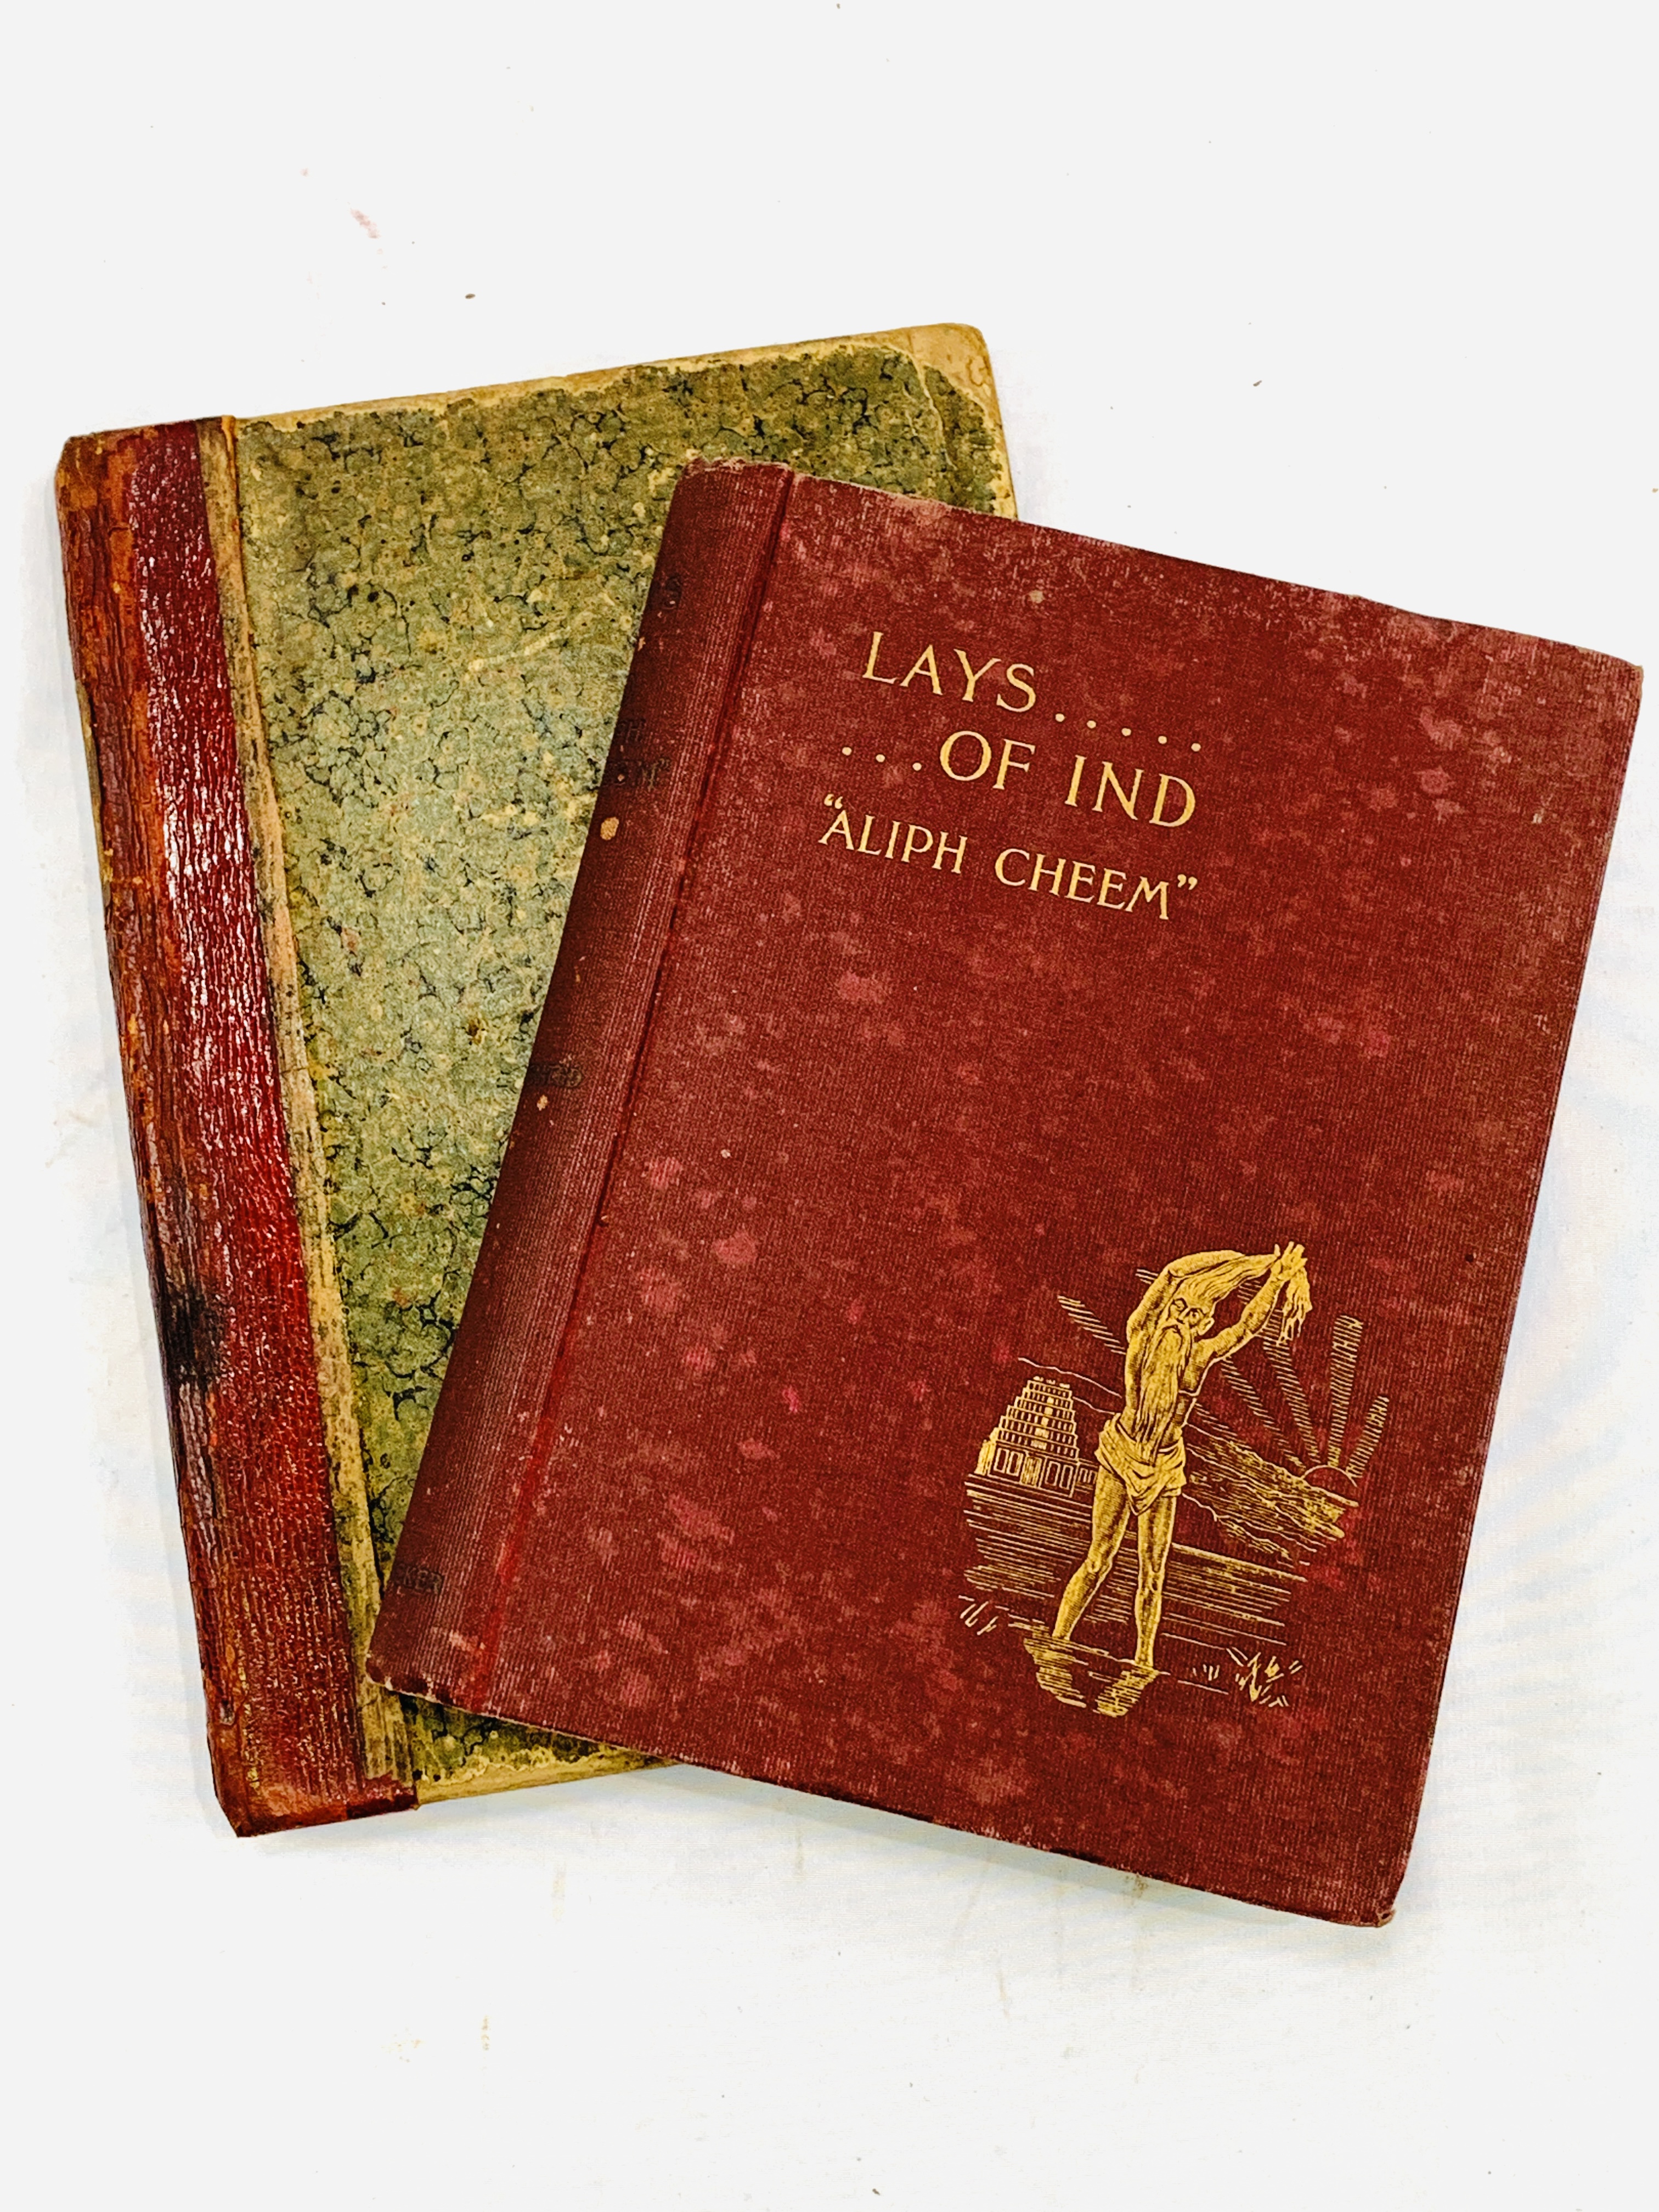 Lays of Ind by "Aliph Cheem" published 1917; together with the Book of Snobs by William Thackeray